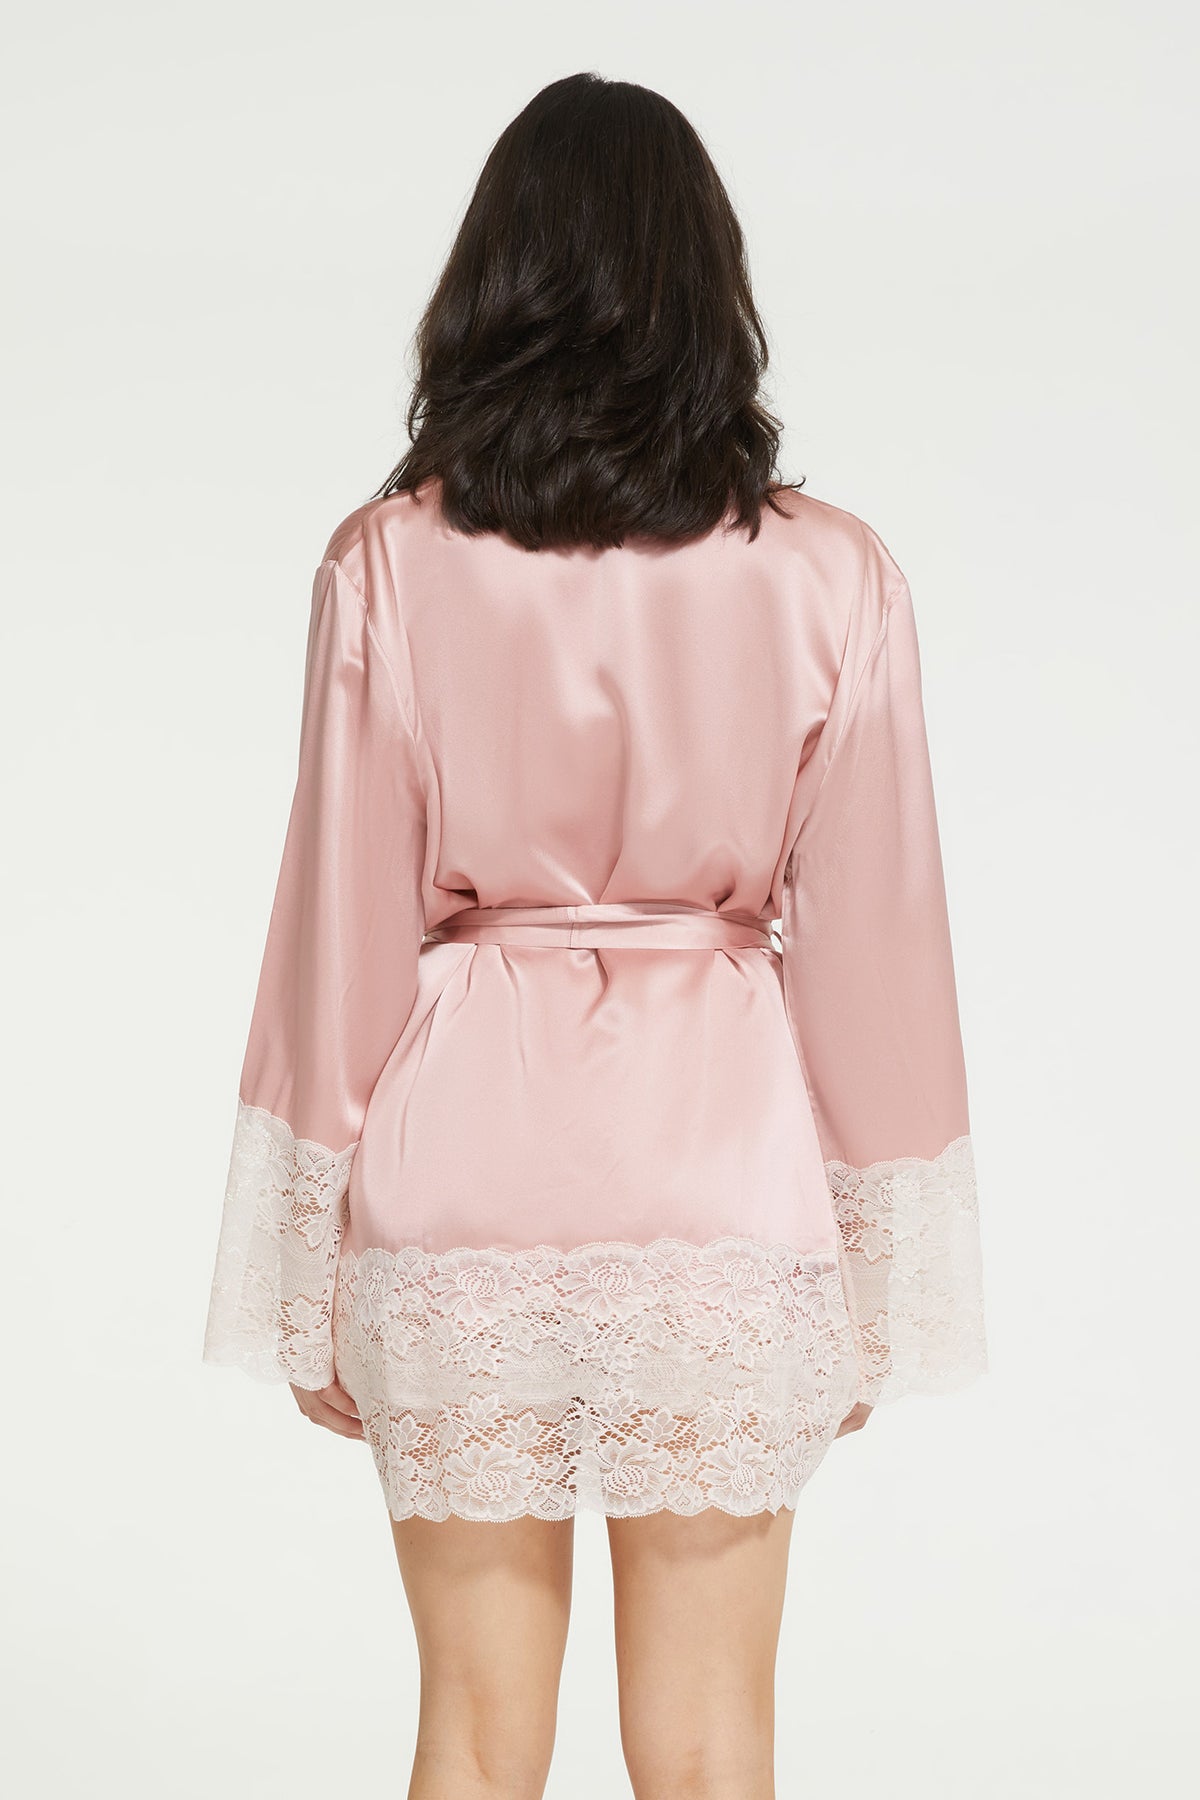 Lace Silk Robe in Bridal Rose in 100% Silk from GINIA